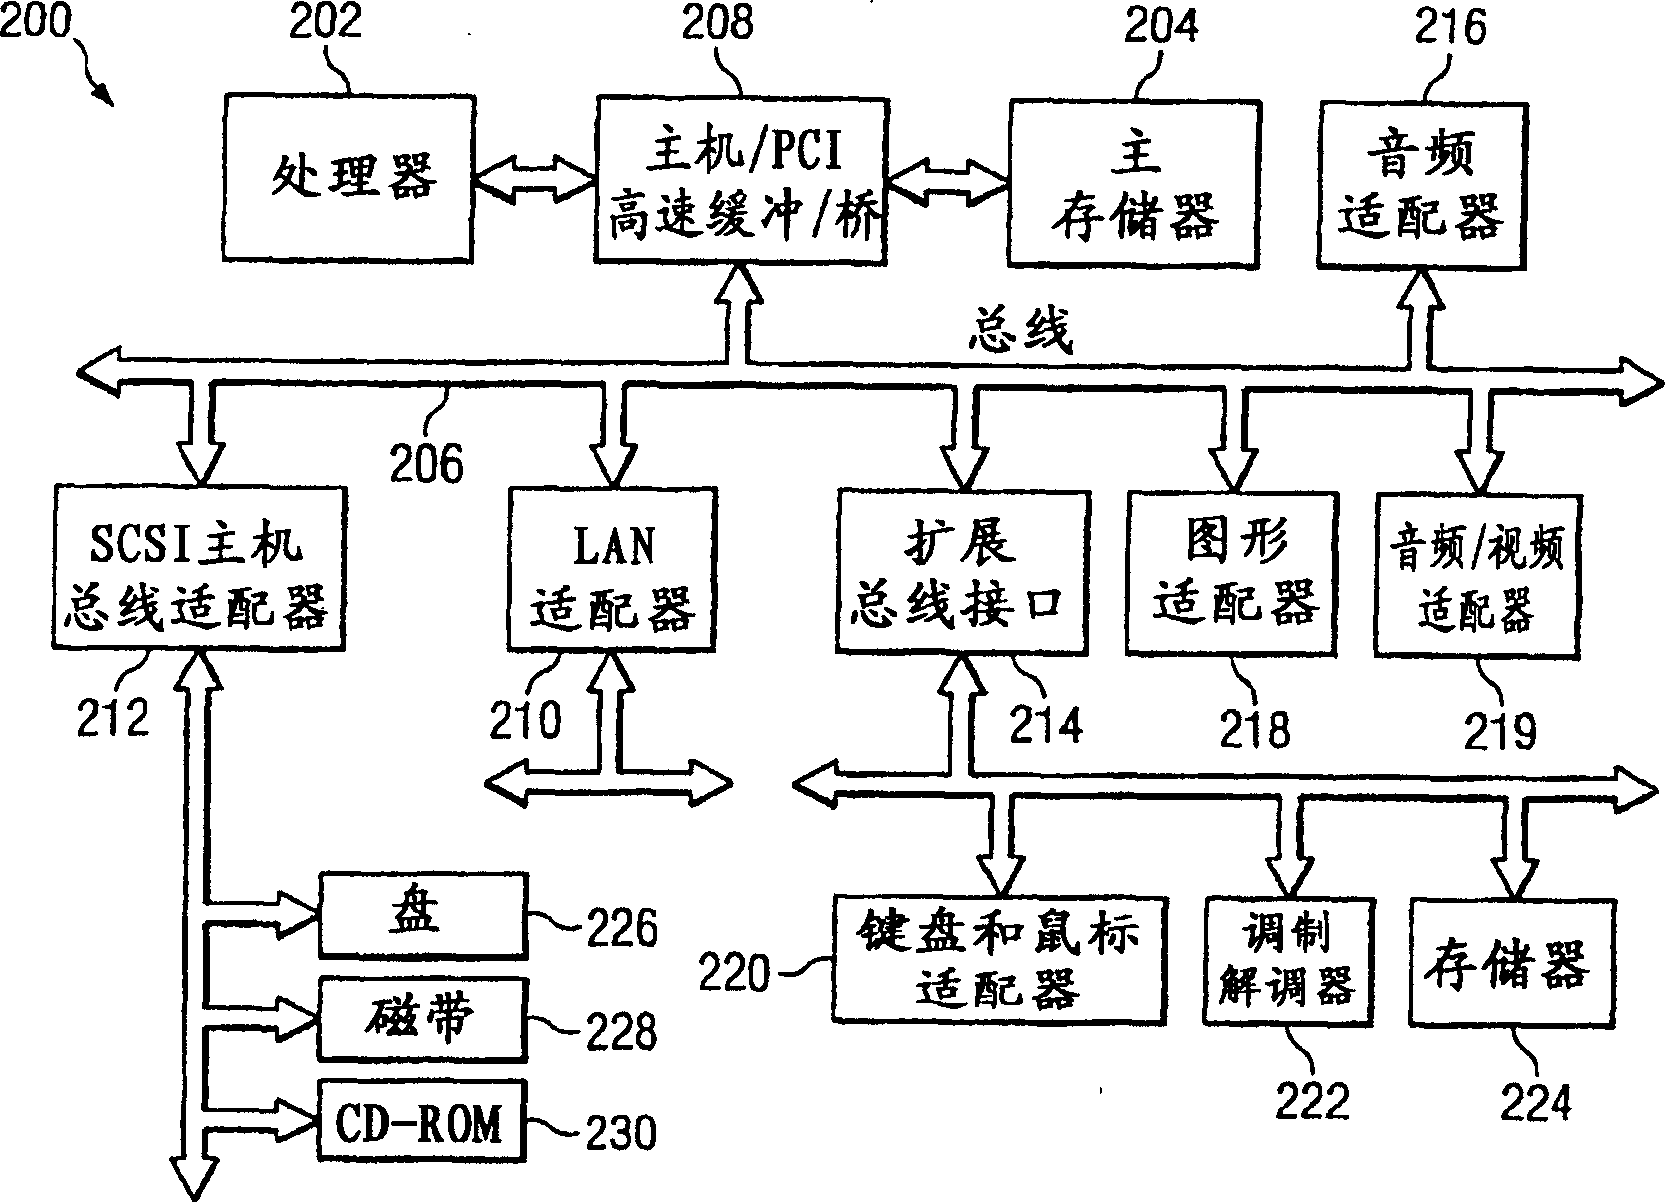 Apparatus and method for enabling unicode input in legacy operating systems